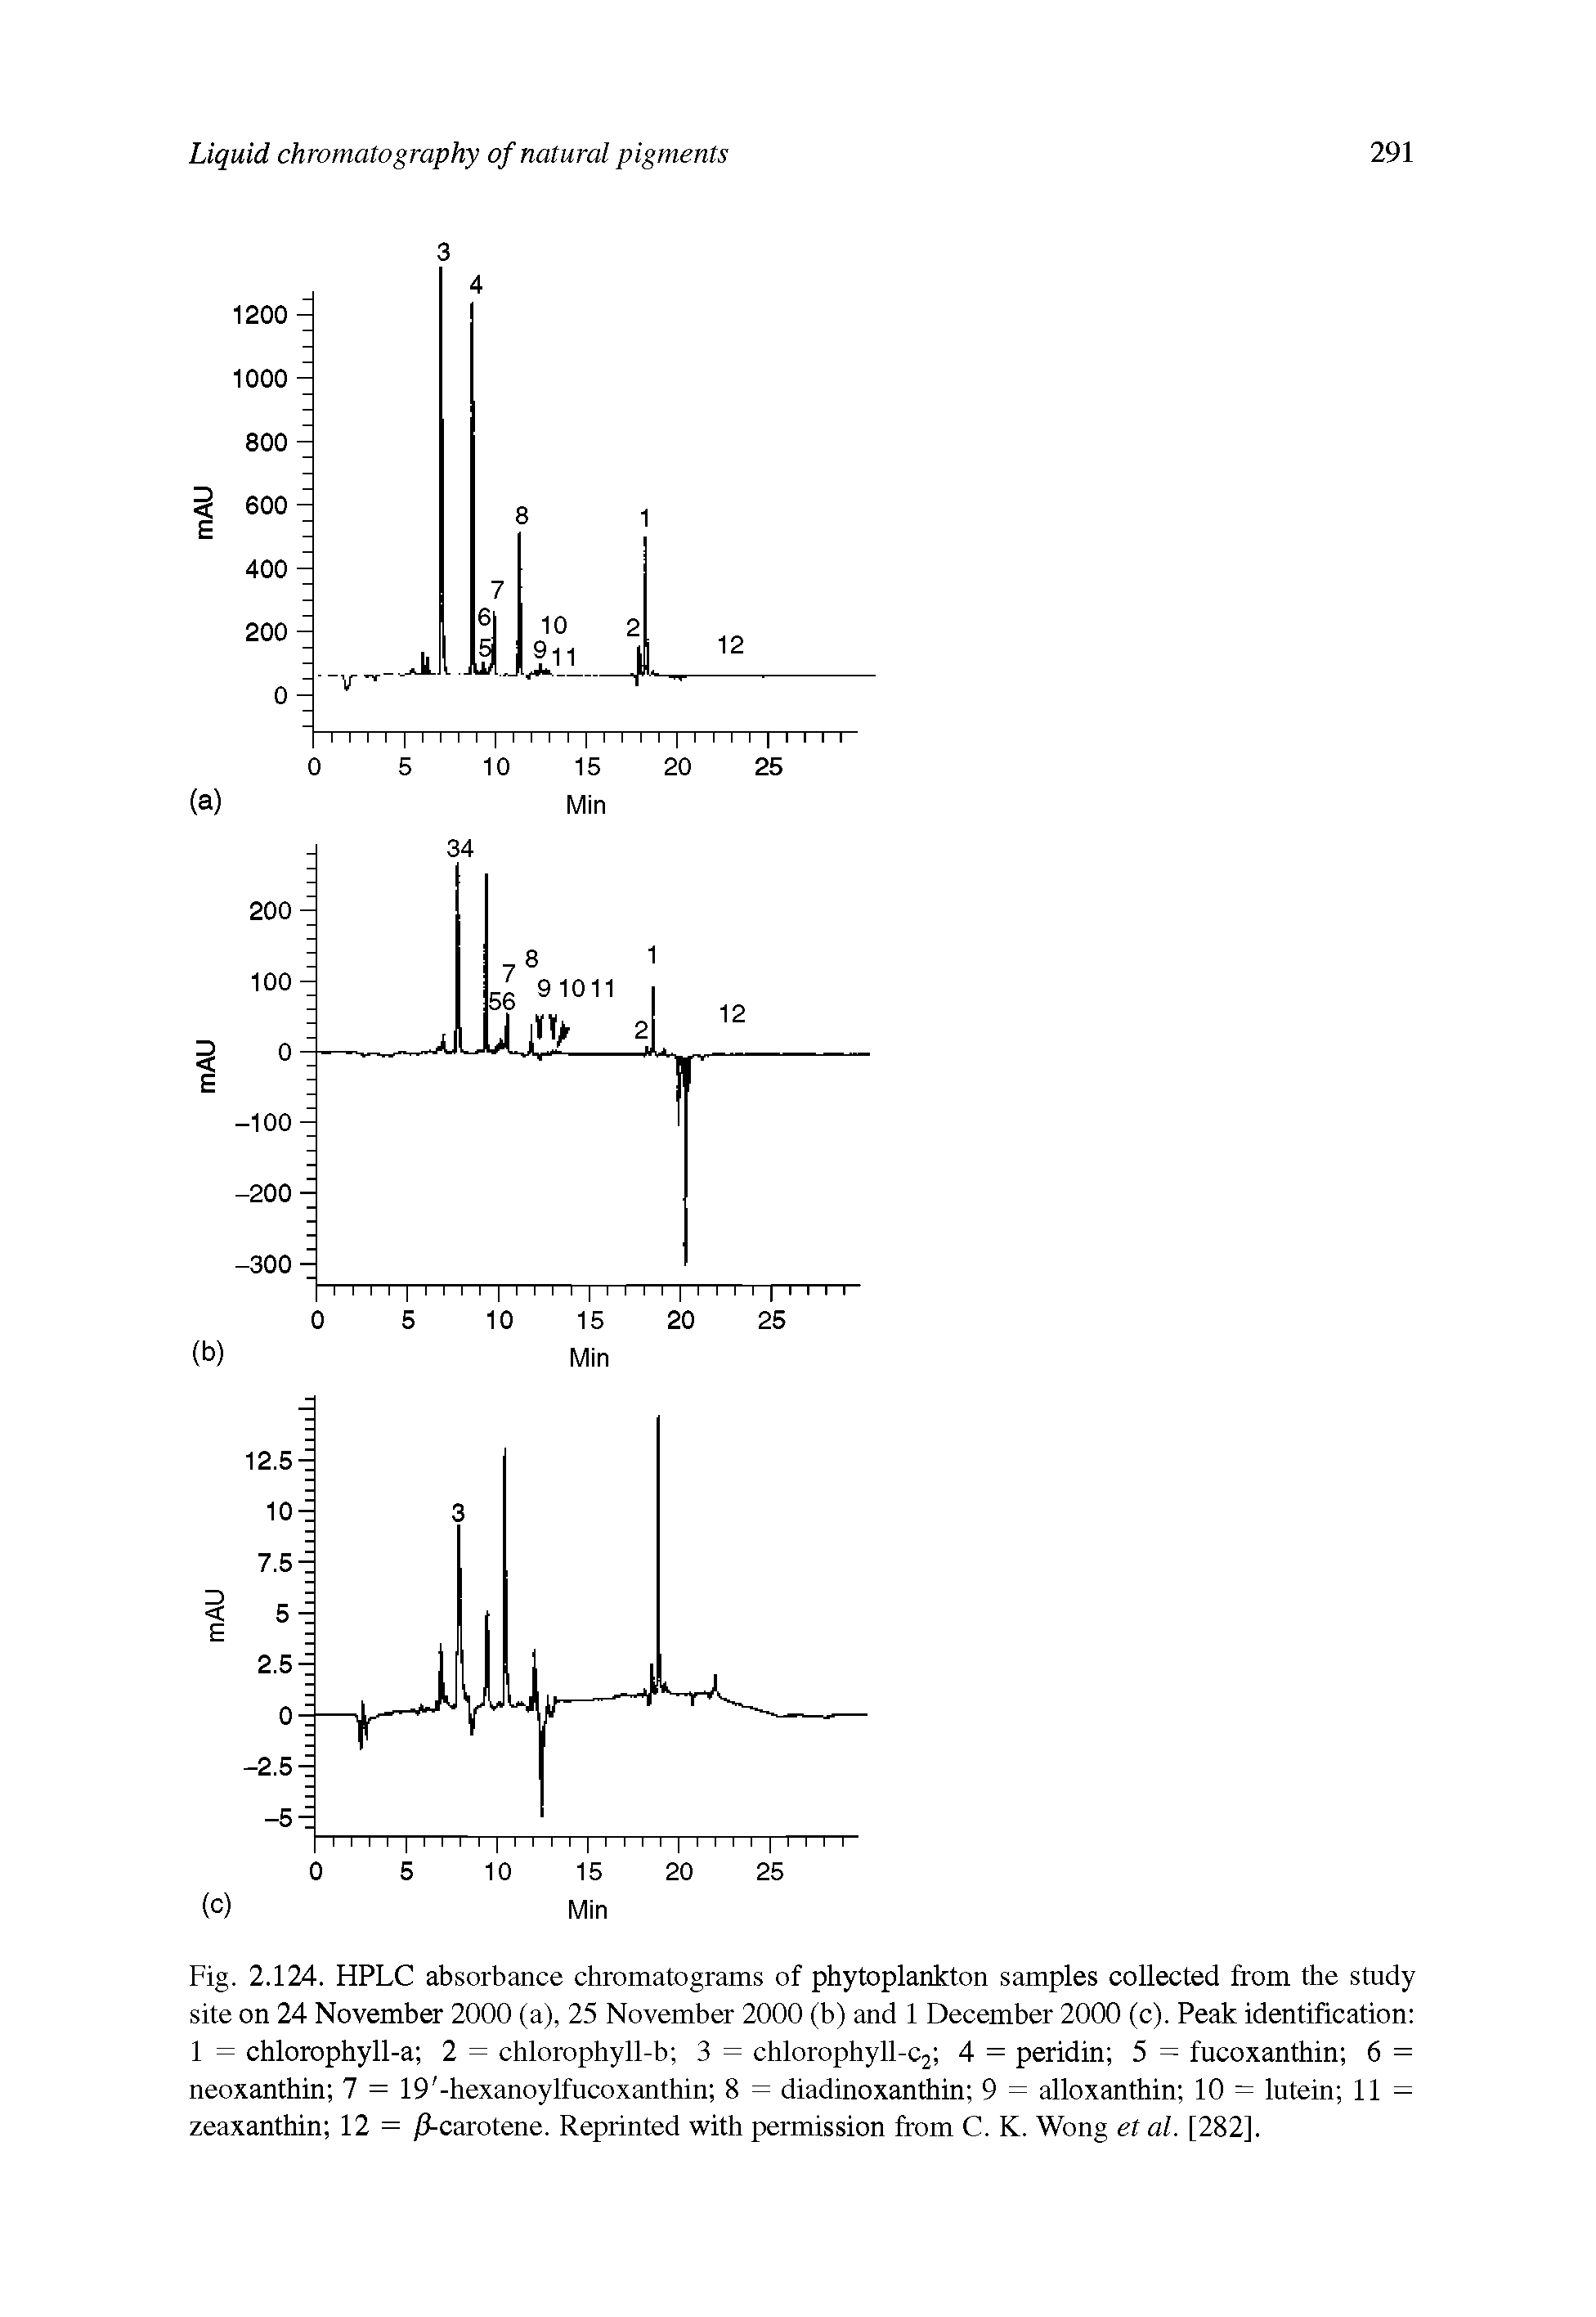 Fig. 2.124. HPLC absorbance chromatograms of phytoplankton samples collected from the study site on 24 November 2000 (a), 25 November 2000 (b) and 1 December 2000 (c). Peak identification 1 = chlorophyll-a 2 = chlorophyll-b 3 = chlorophyll-c2 4 = peridin 5 = fucoxanthin 6 = neoxanthin 7 = 19 -hexanoylfucoxanthin 8 = diadinoxanthin 9 = alloxanthin 10 = lutein 11 = zeaxanthin 12 = /1-carotene. Reprinted with permission from C. K. Wong et al. [282],...